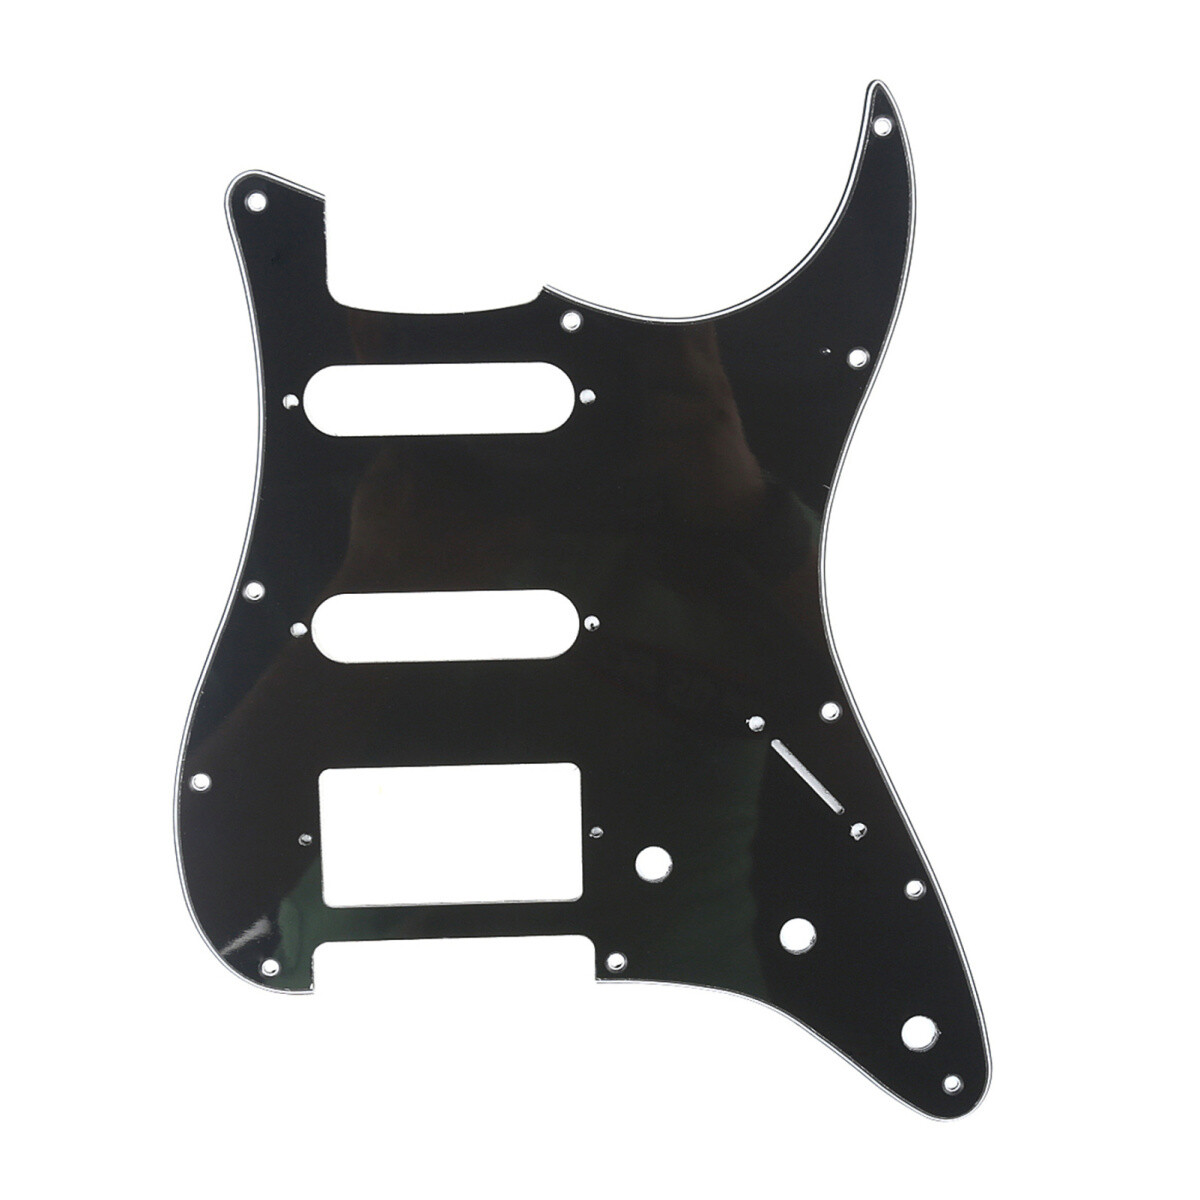 Brio 11-Hole Modern Style Strat HSS Pickguard for American Stratocaster Black 3 Ply